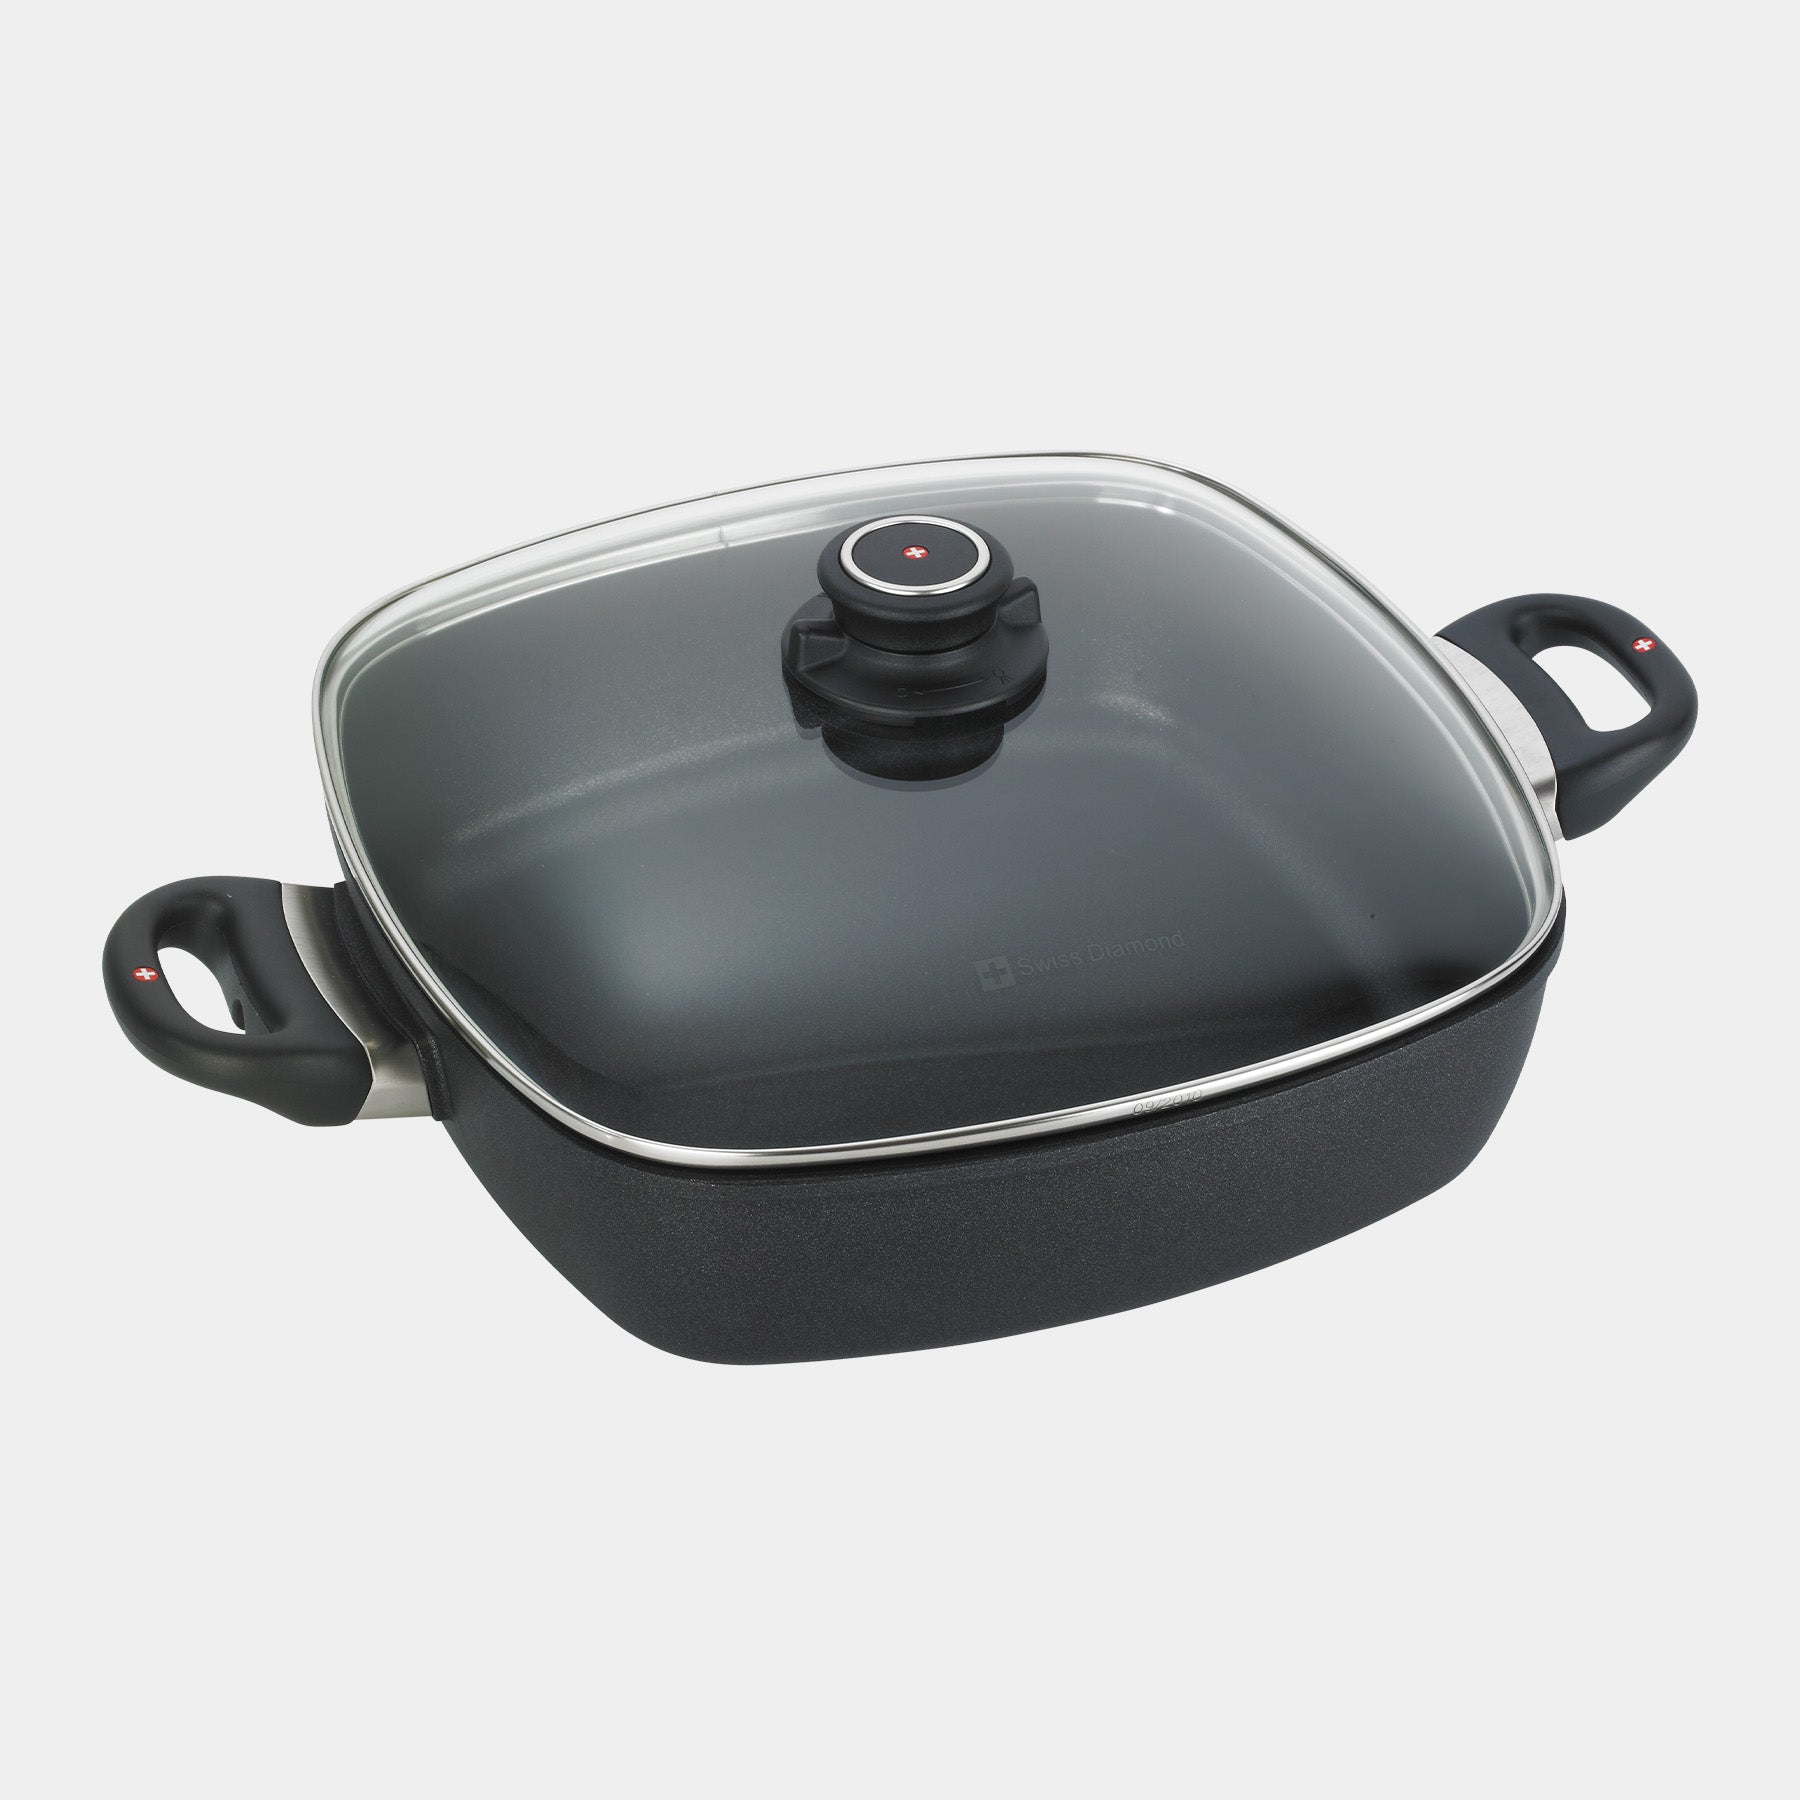 XD Nonstick 5 qt Square Casserole with Glass Lid Top View